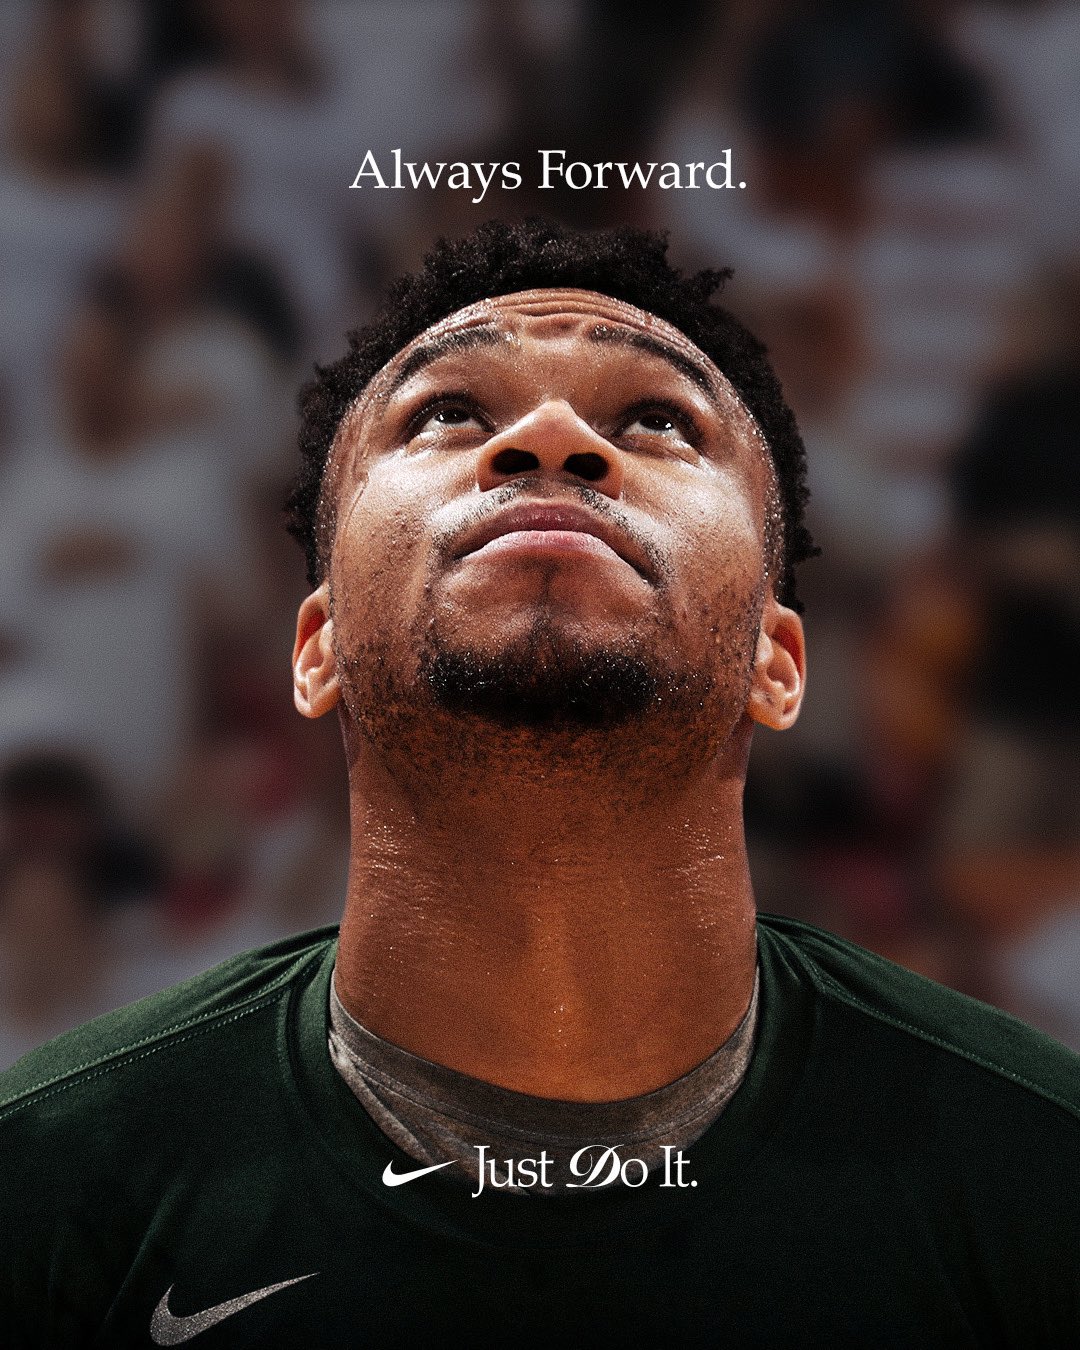 Nike on Twitter: "“There's no failure in sports. It's steps to success.” - @Giannis_An34 Regardless of the outcome, there's a reward ahead. # AlwaysForward https://t.co/czJMC0tl49" / Twitter